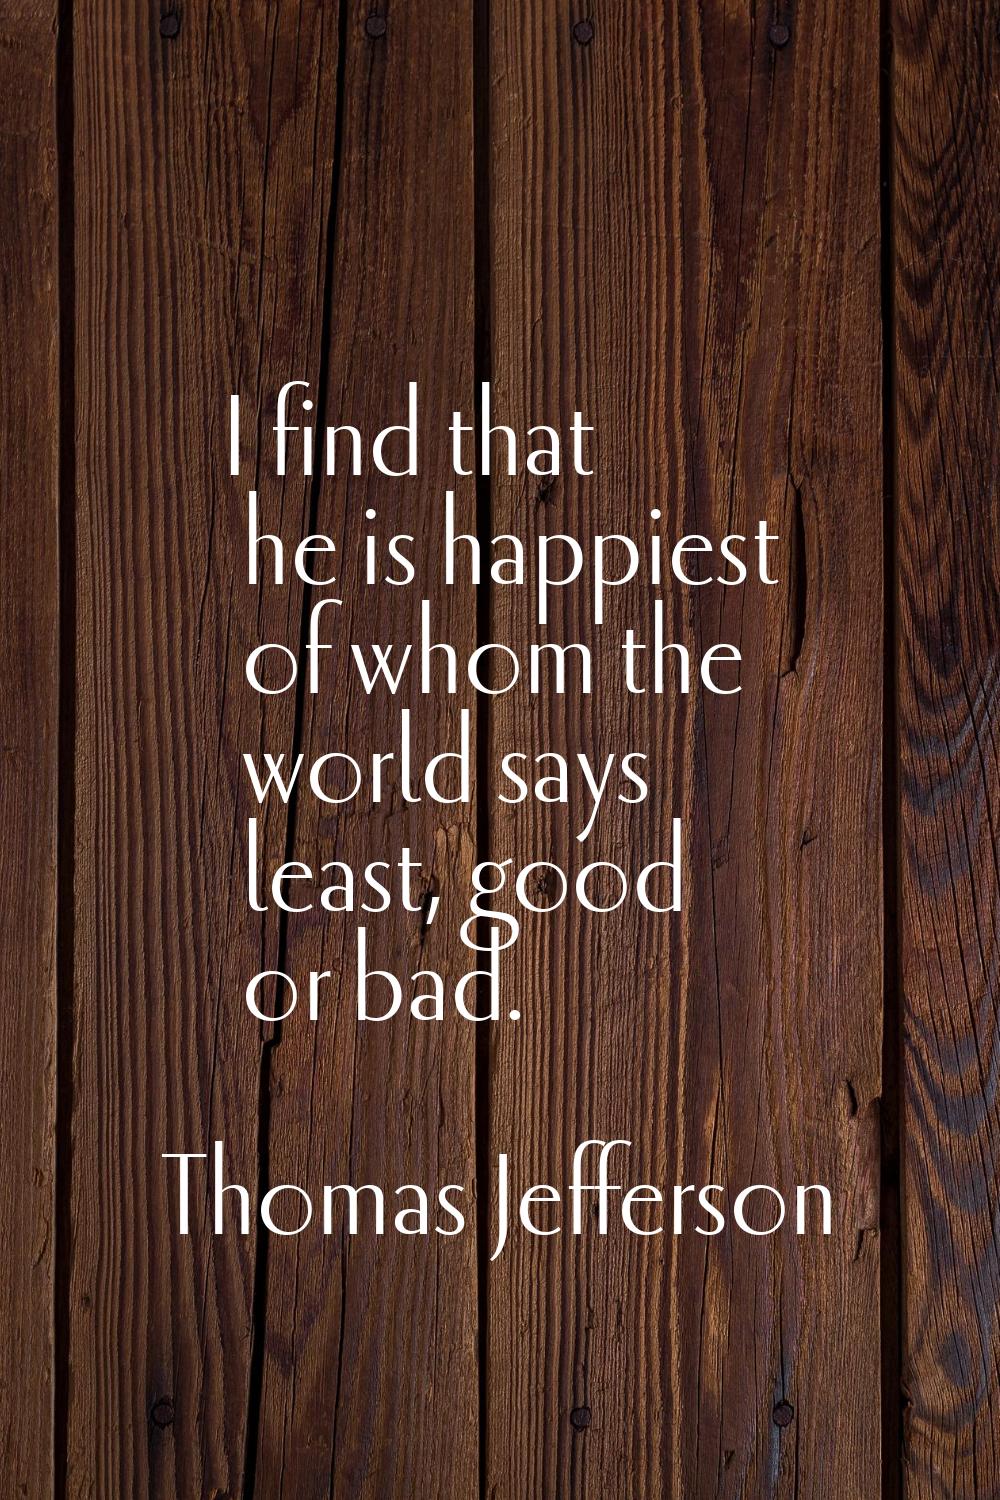 I find that he is happiest of whom the world says least, good or bad.